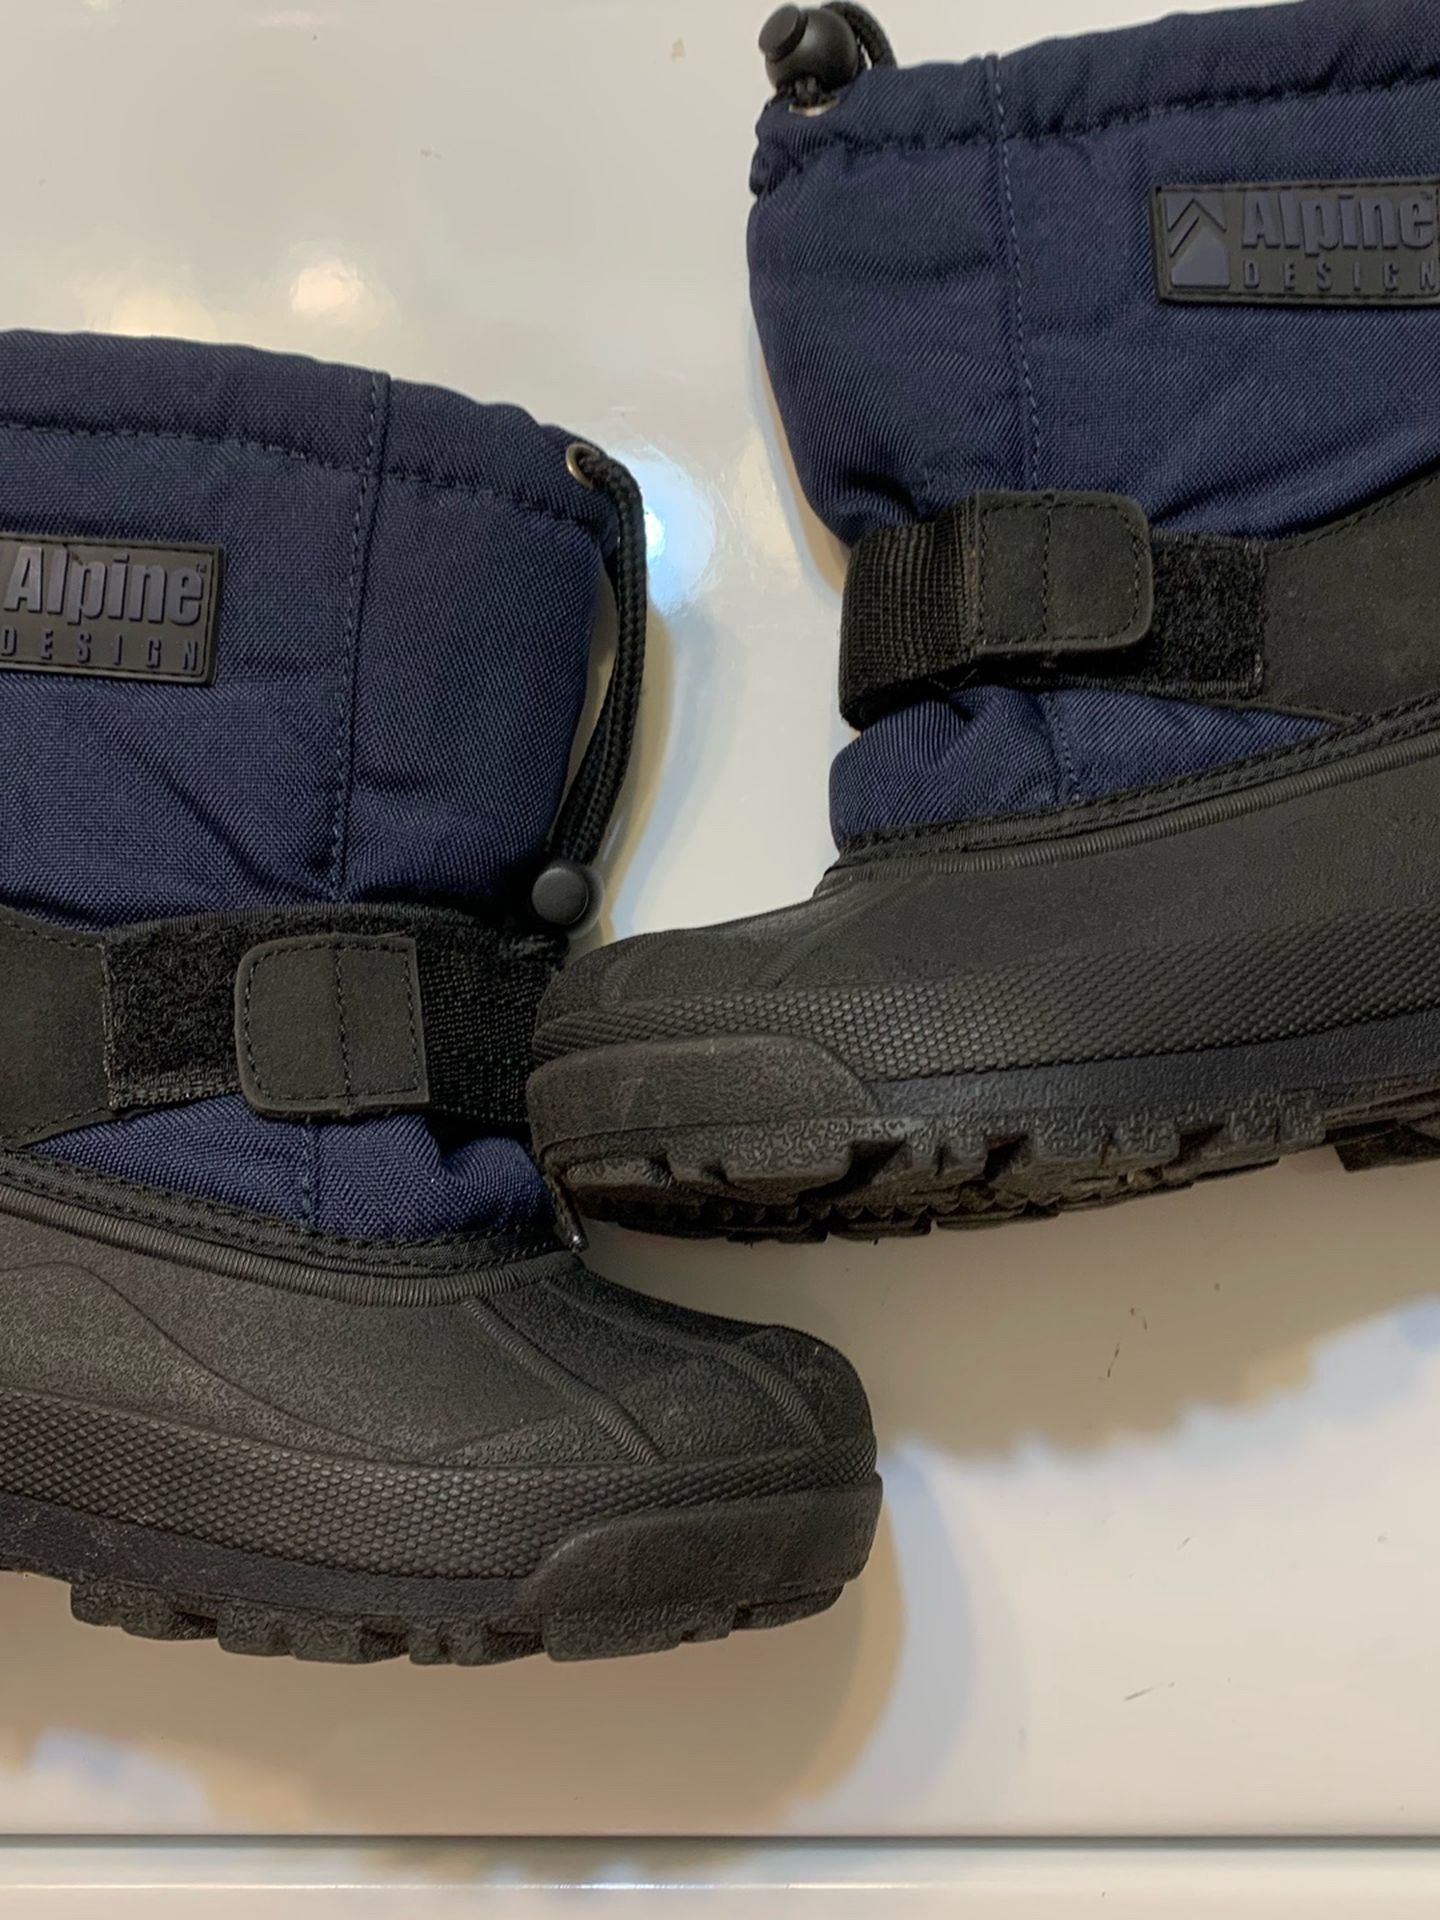 **KIDS WINTER SNOW BOOTS IN GOOD CONDITION SIZE 11-12